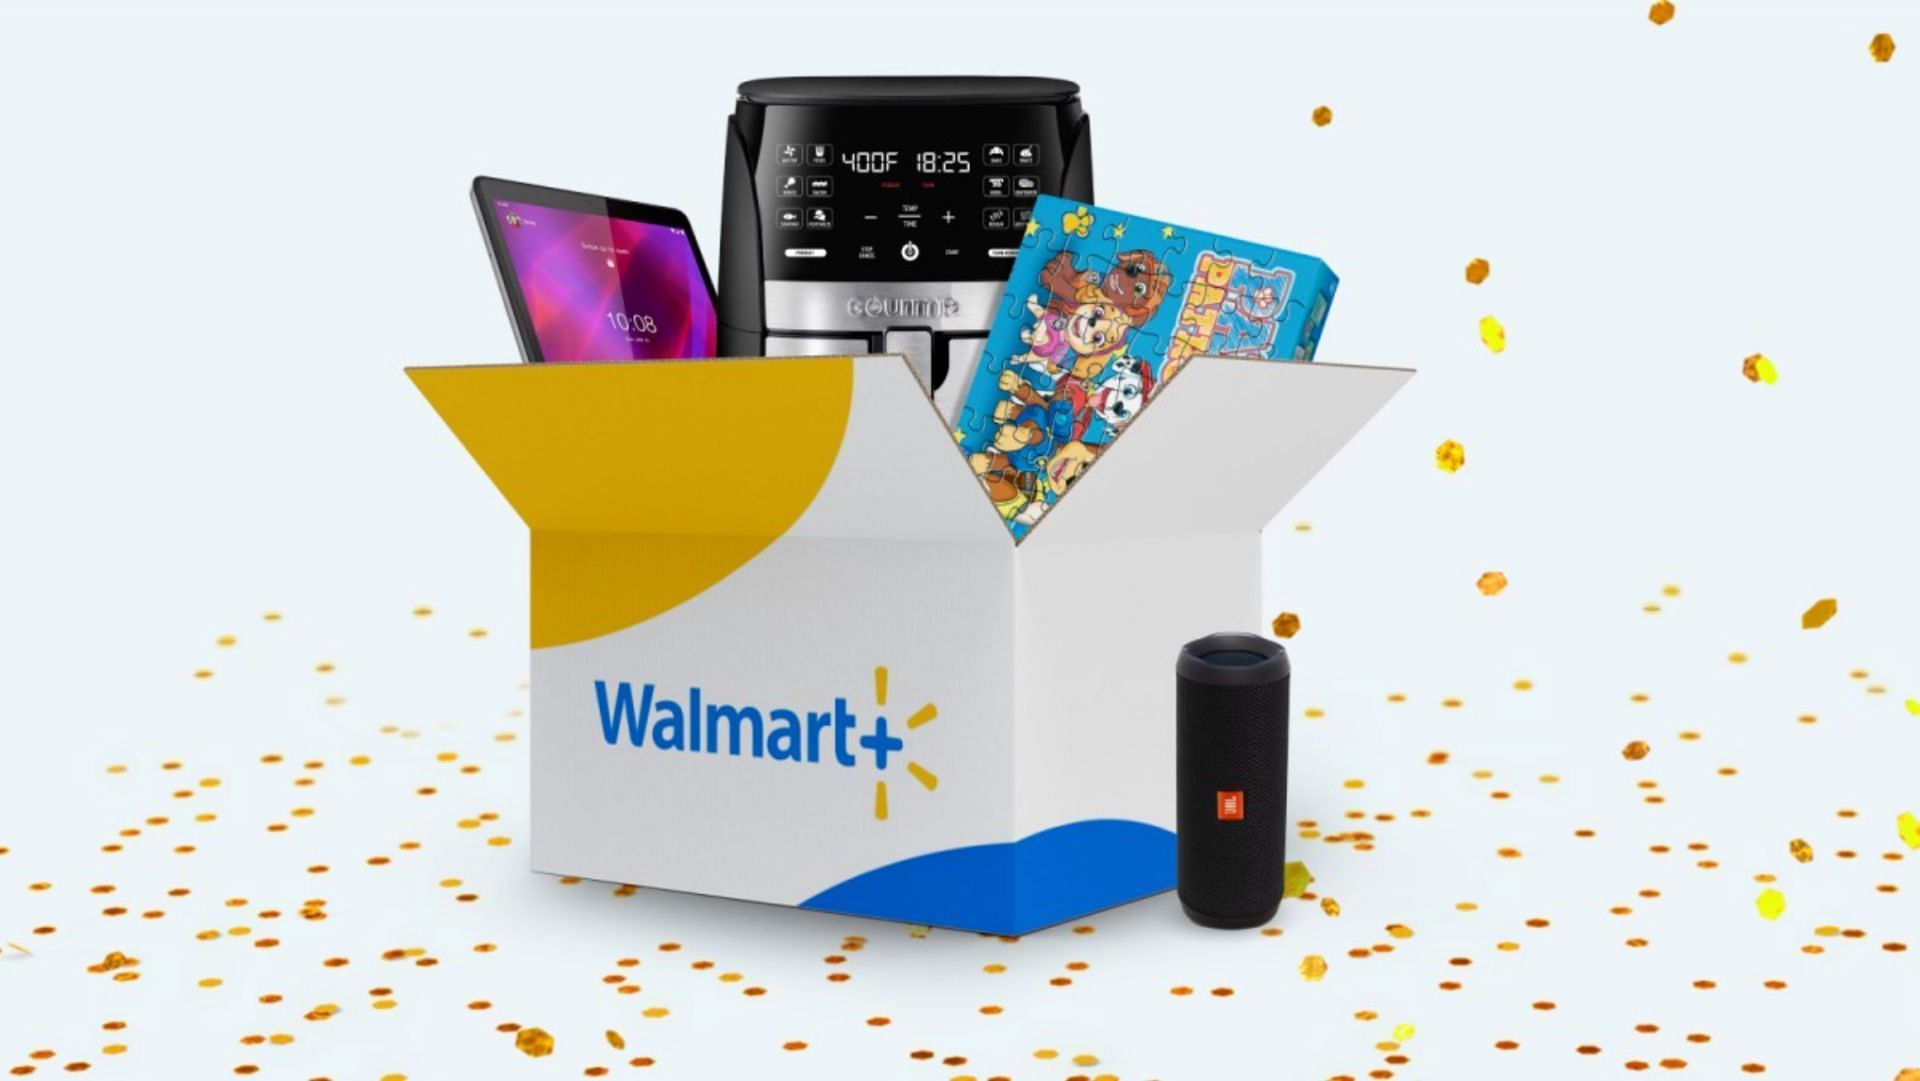 Walmart+ members will get an early grasp at the offers (Image via Walmart)